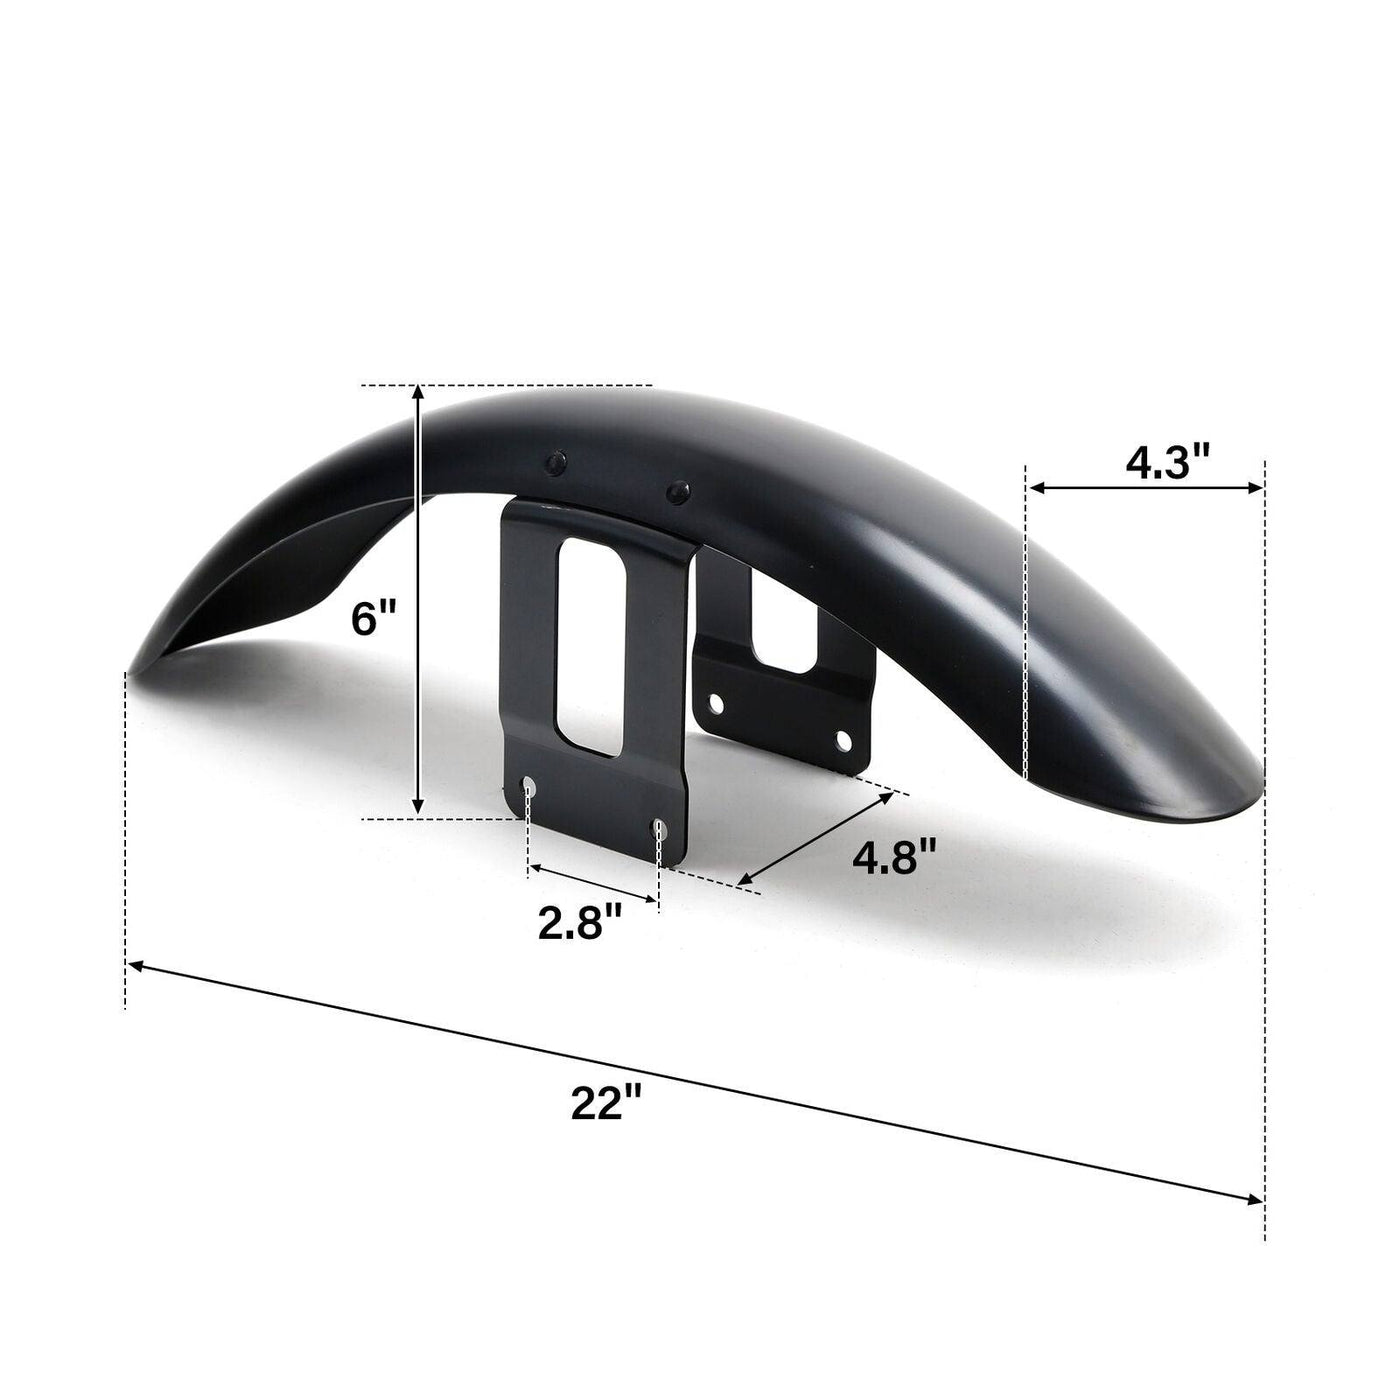 Unpainted Front Fender Mudguard Fit For Harley-Davidson Sportster 883 1200 XL883 - Moto Life Products